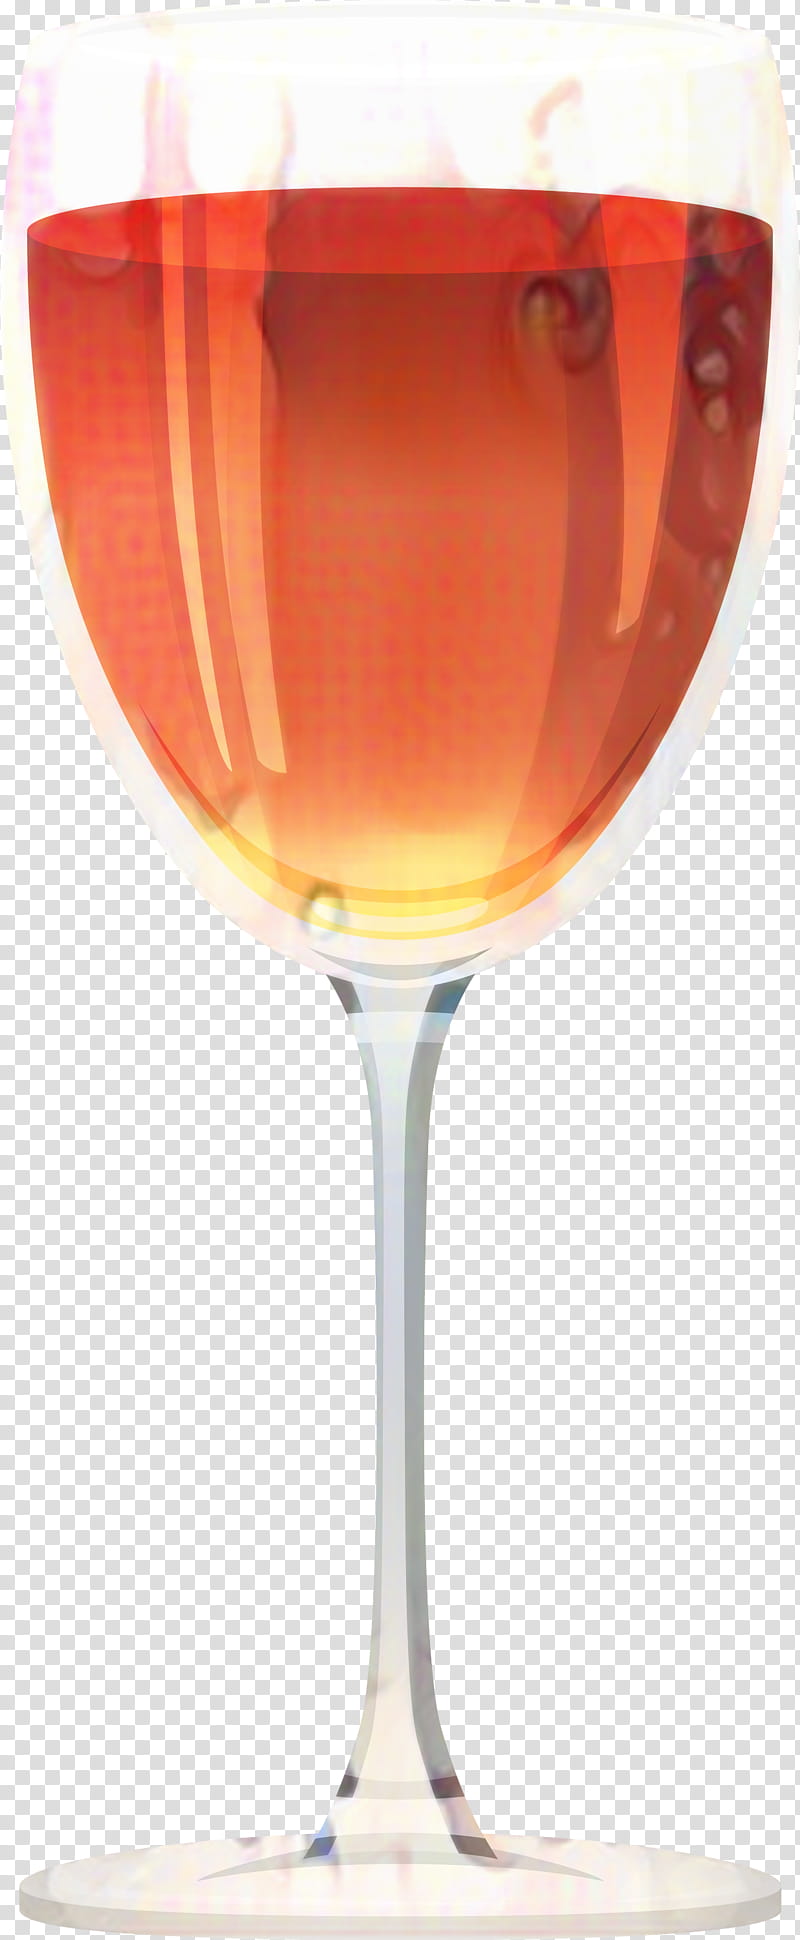 Wine, Wine Cocktail, Wine Glass, Kir, Cocktail Garnish, Champagne Glass, Stemware, Champagne Stemware transparent background PNG clipart